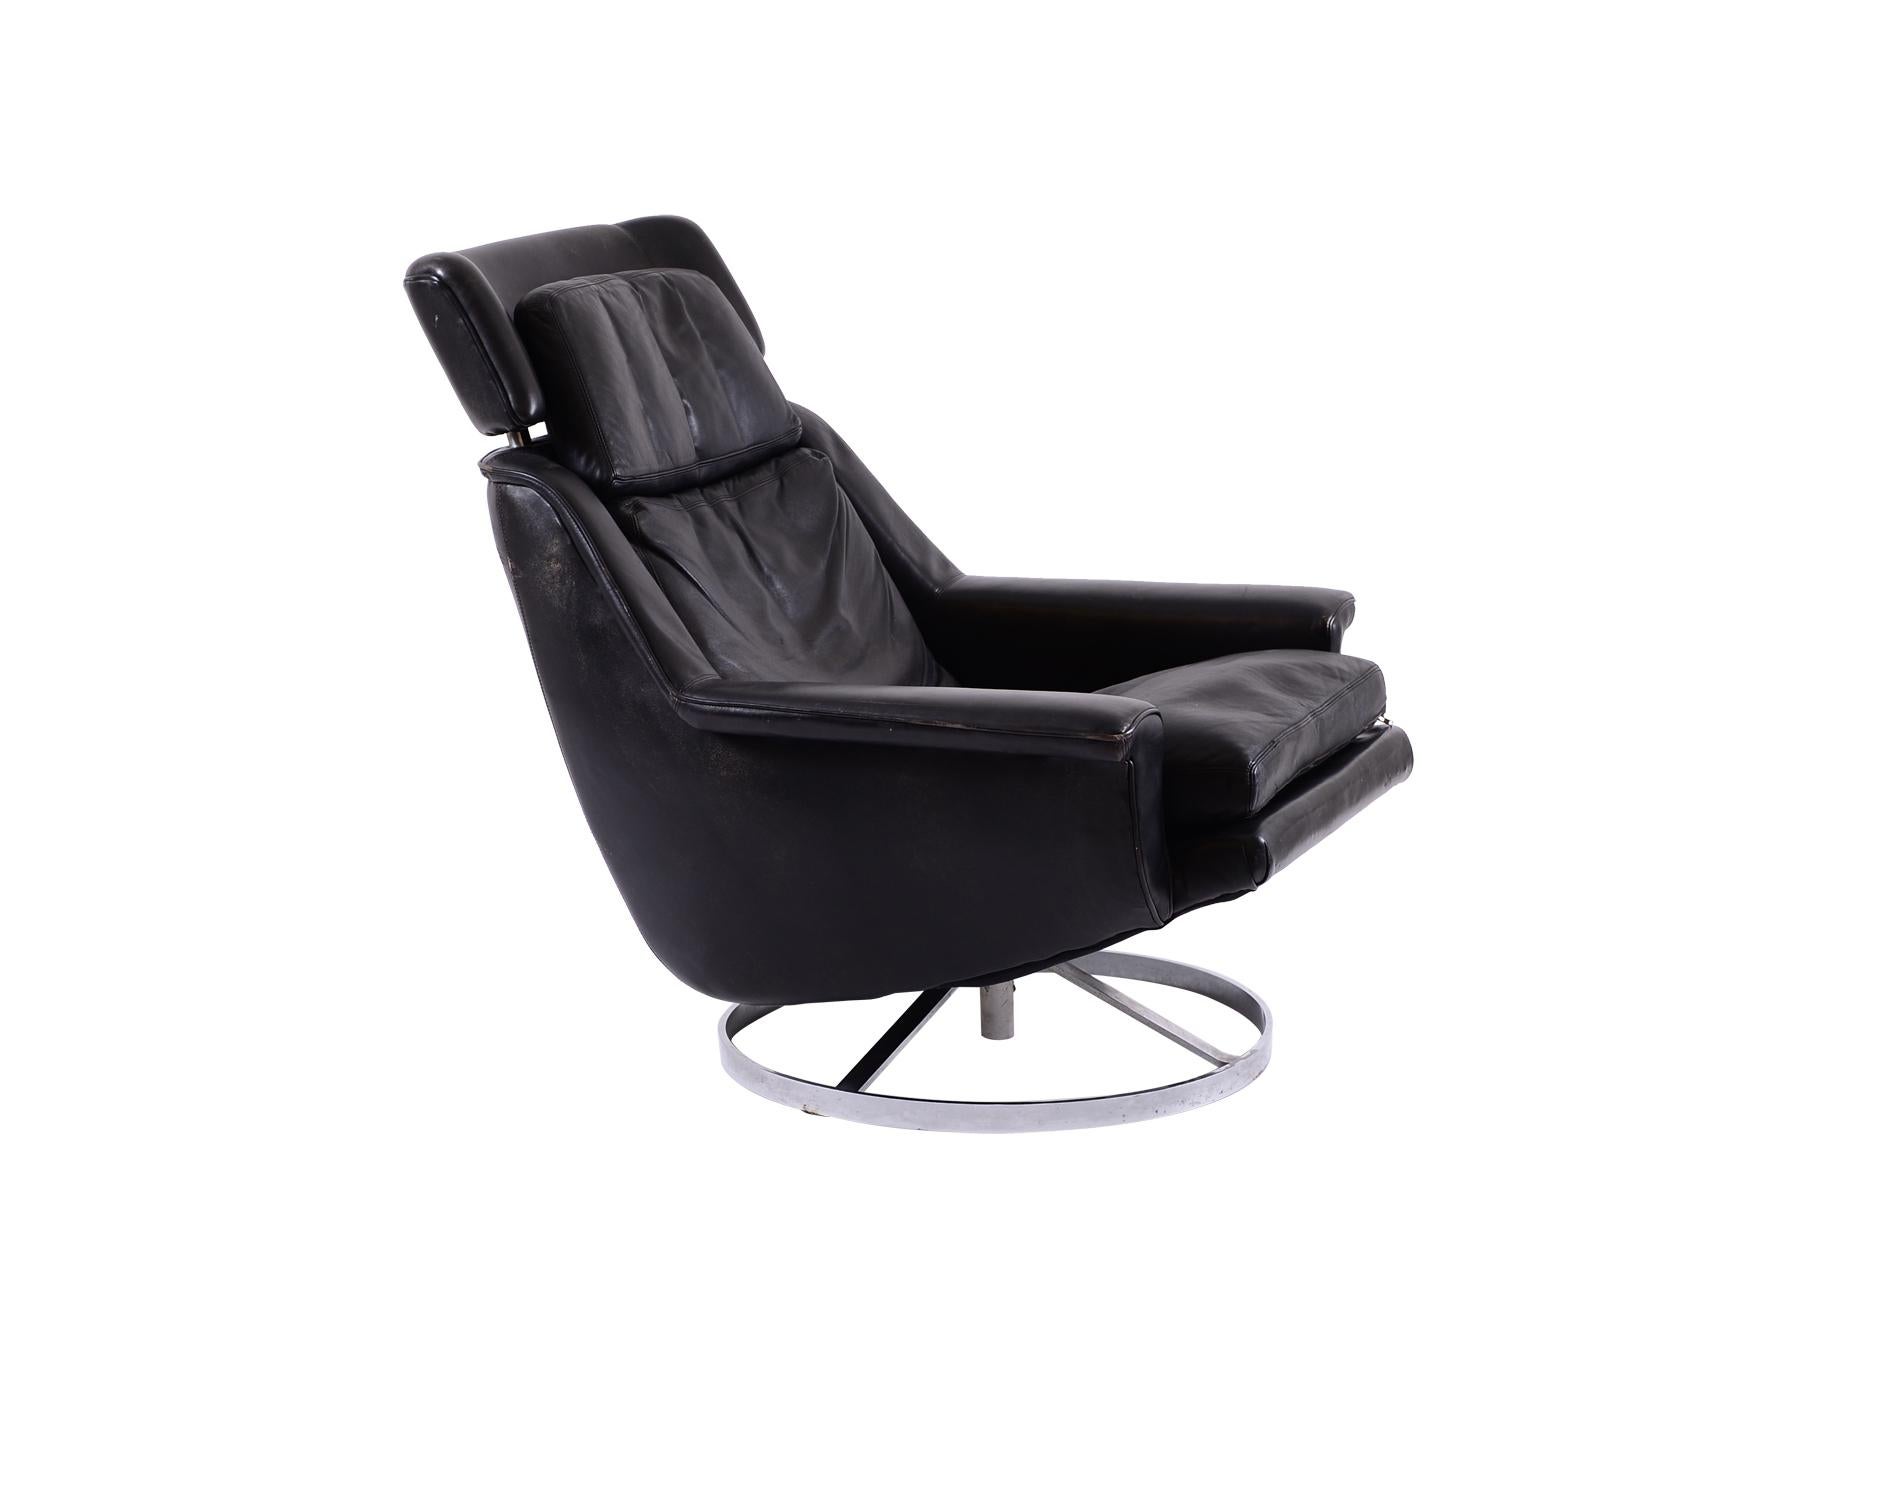 American Mid-Century Modern Chromed Steel/ Black Leather Eames Era Lounge Chair  For Sale